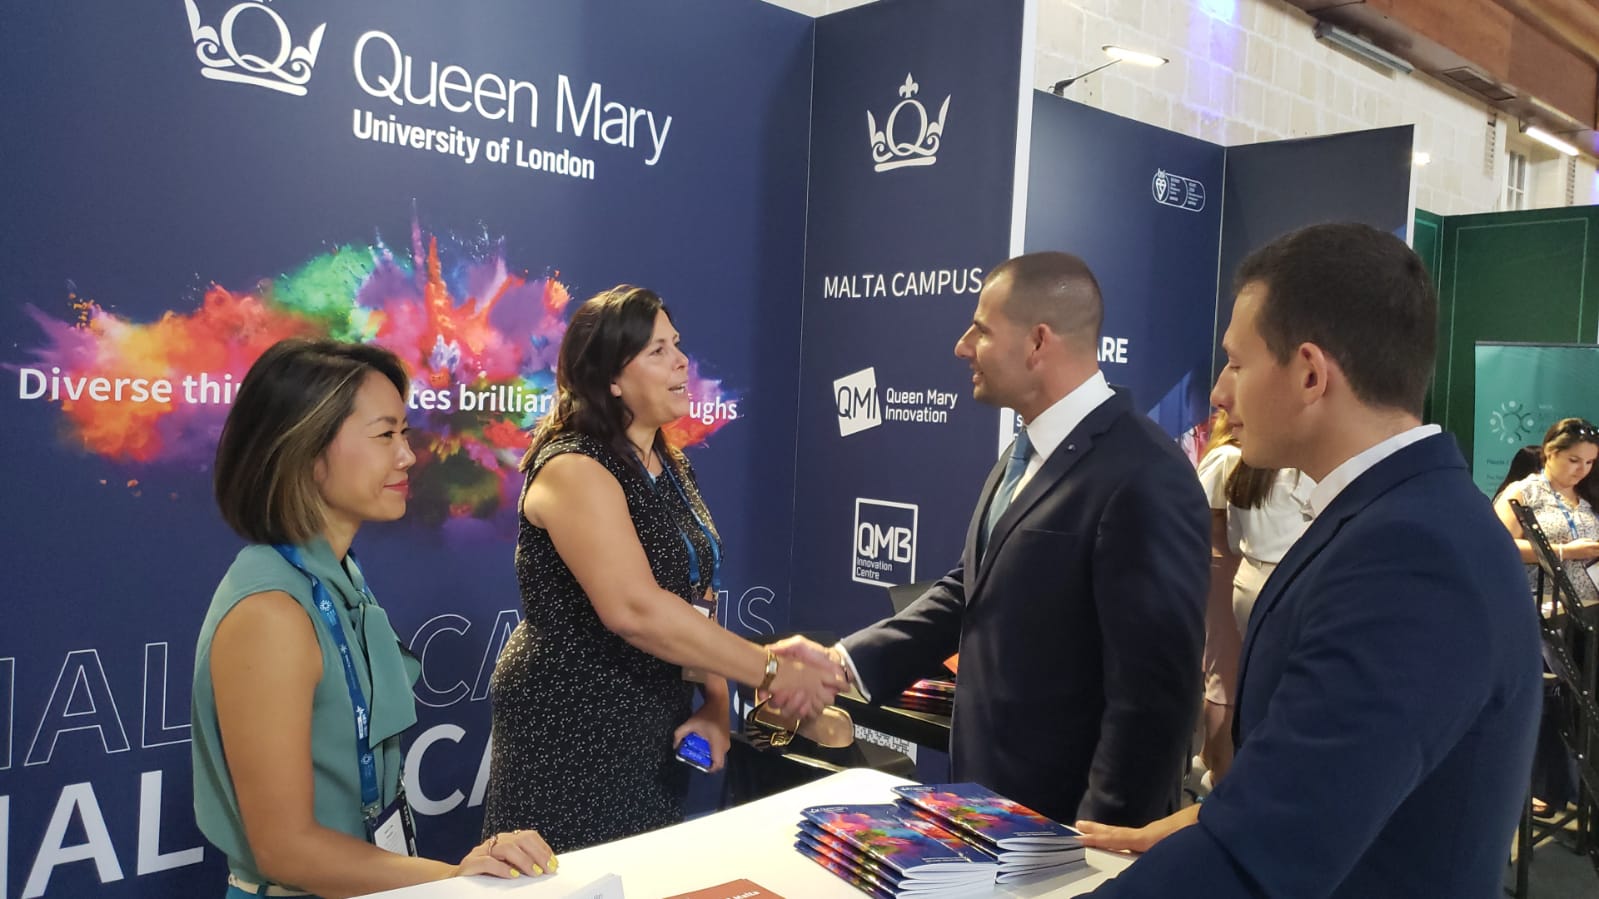 Dr Robert Abela being greeted on the Queen Mary Stand at Med-Tech 2023 with Dr Dylan Attard